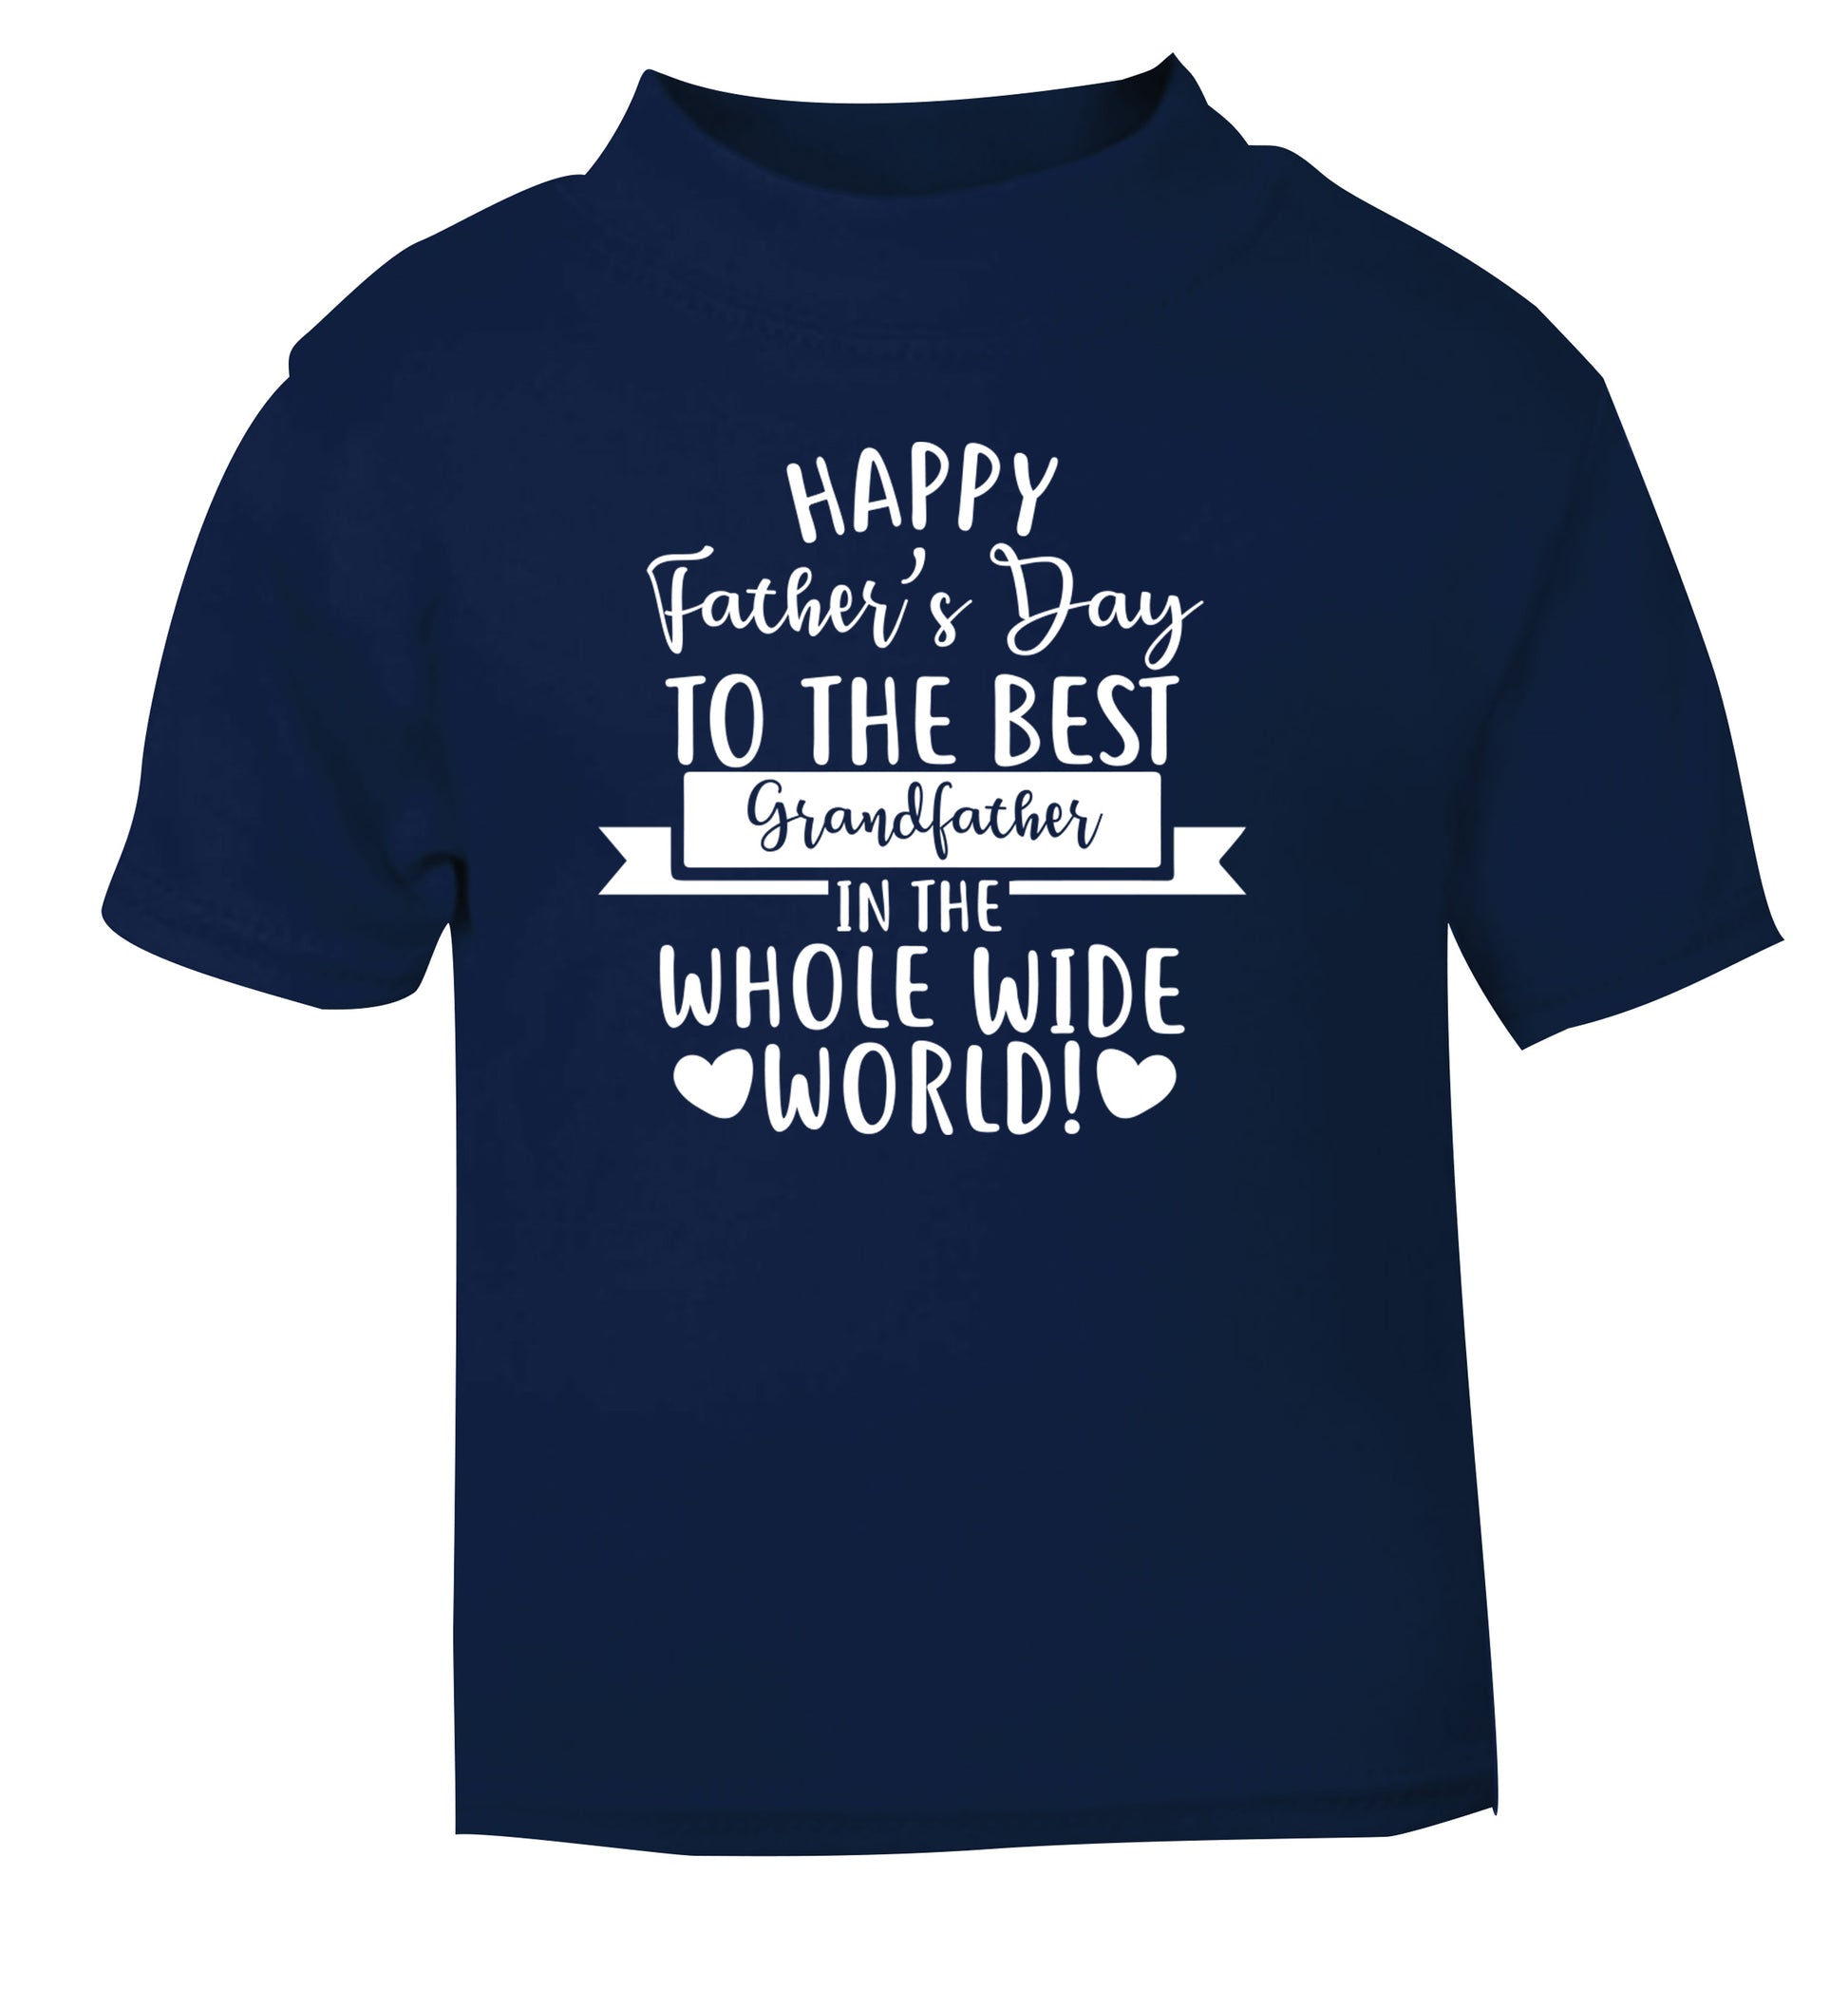 Happy Father's Day to the best grandfather in the world navy Baby Toddler Tshirt 2 Years